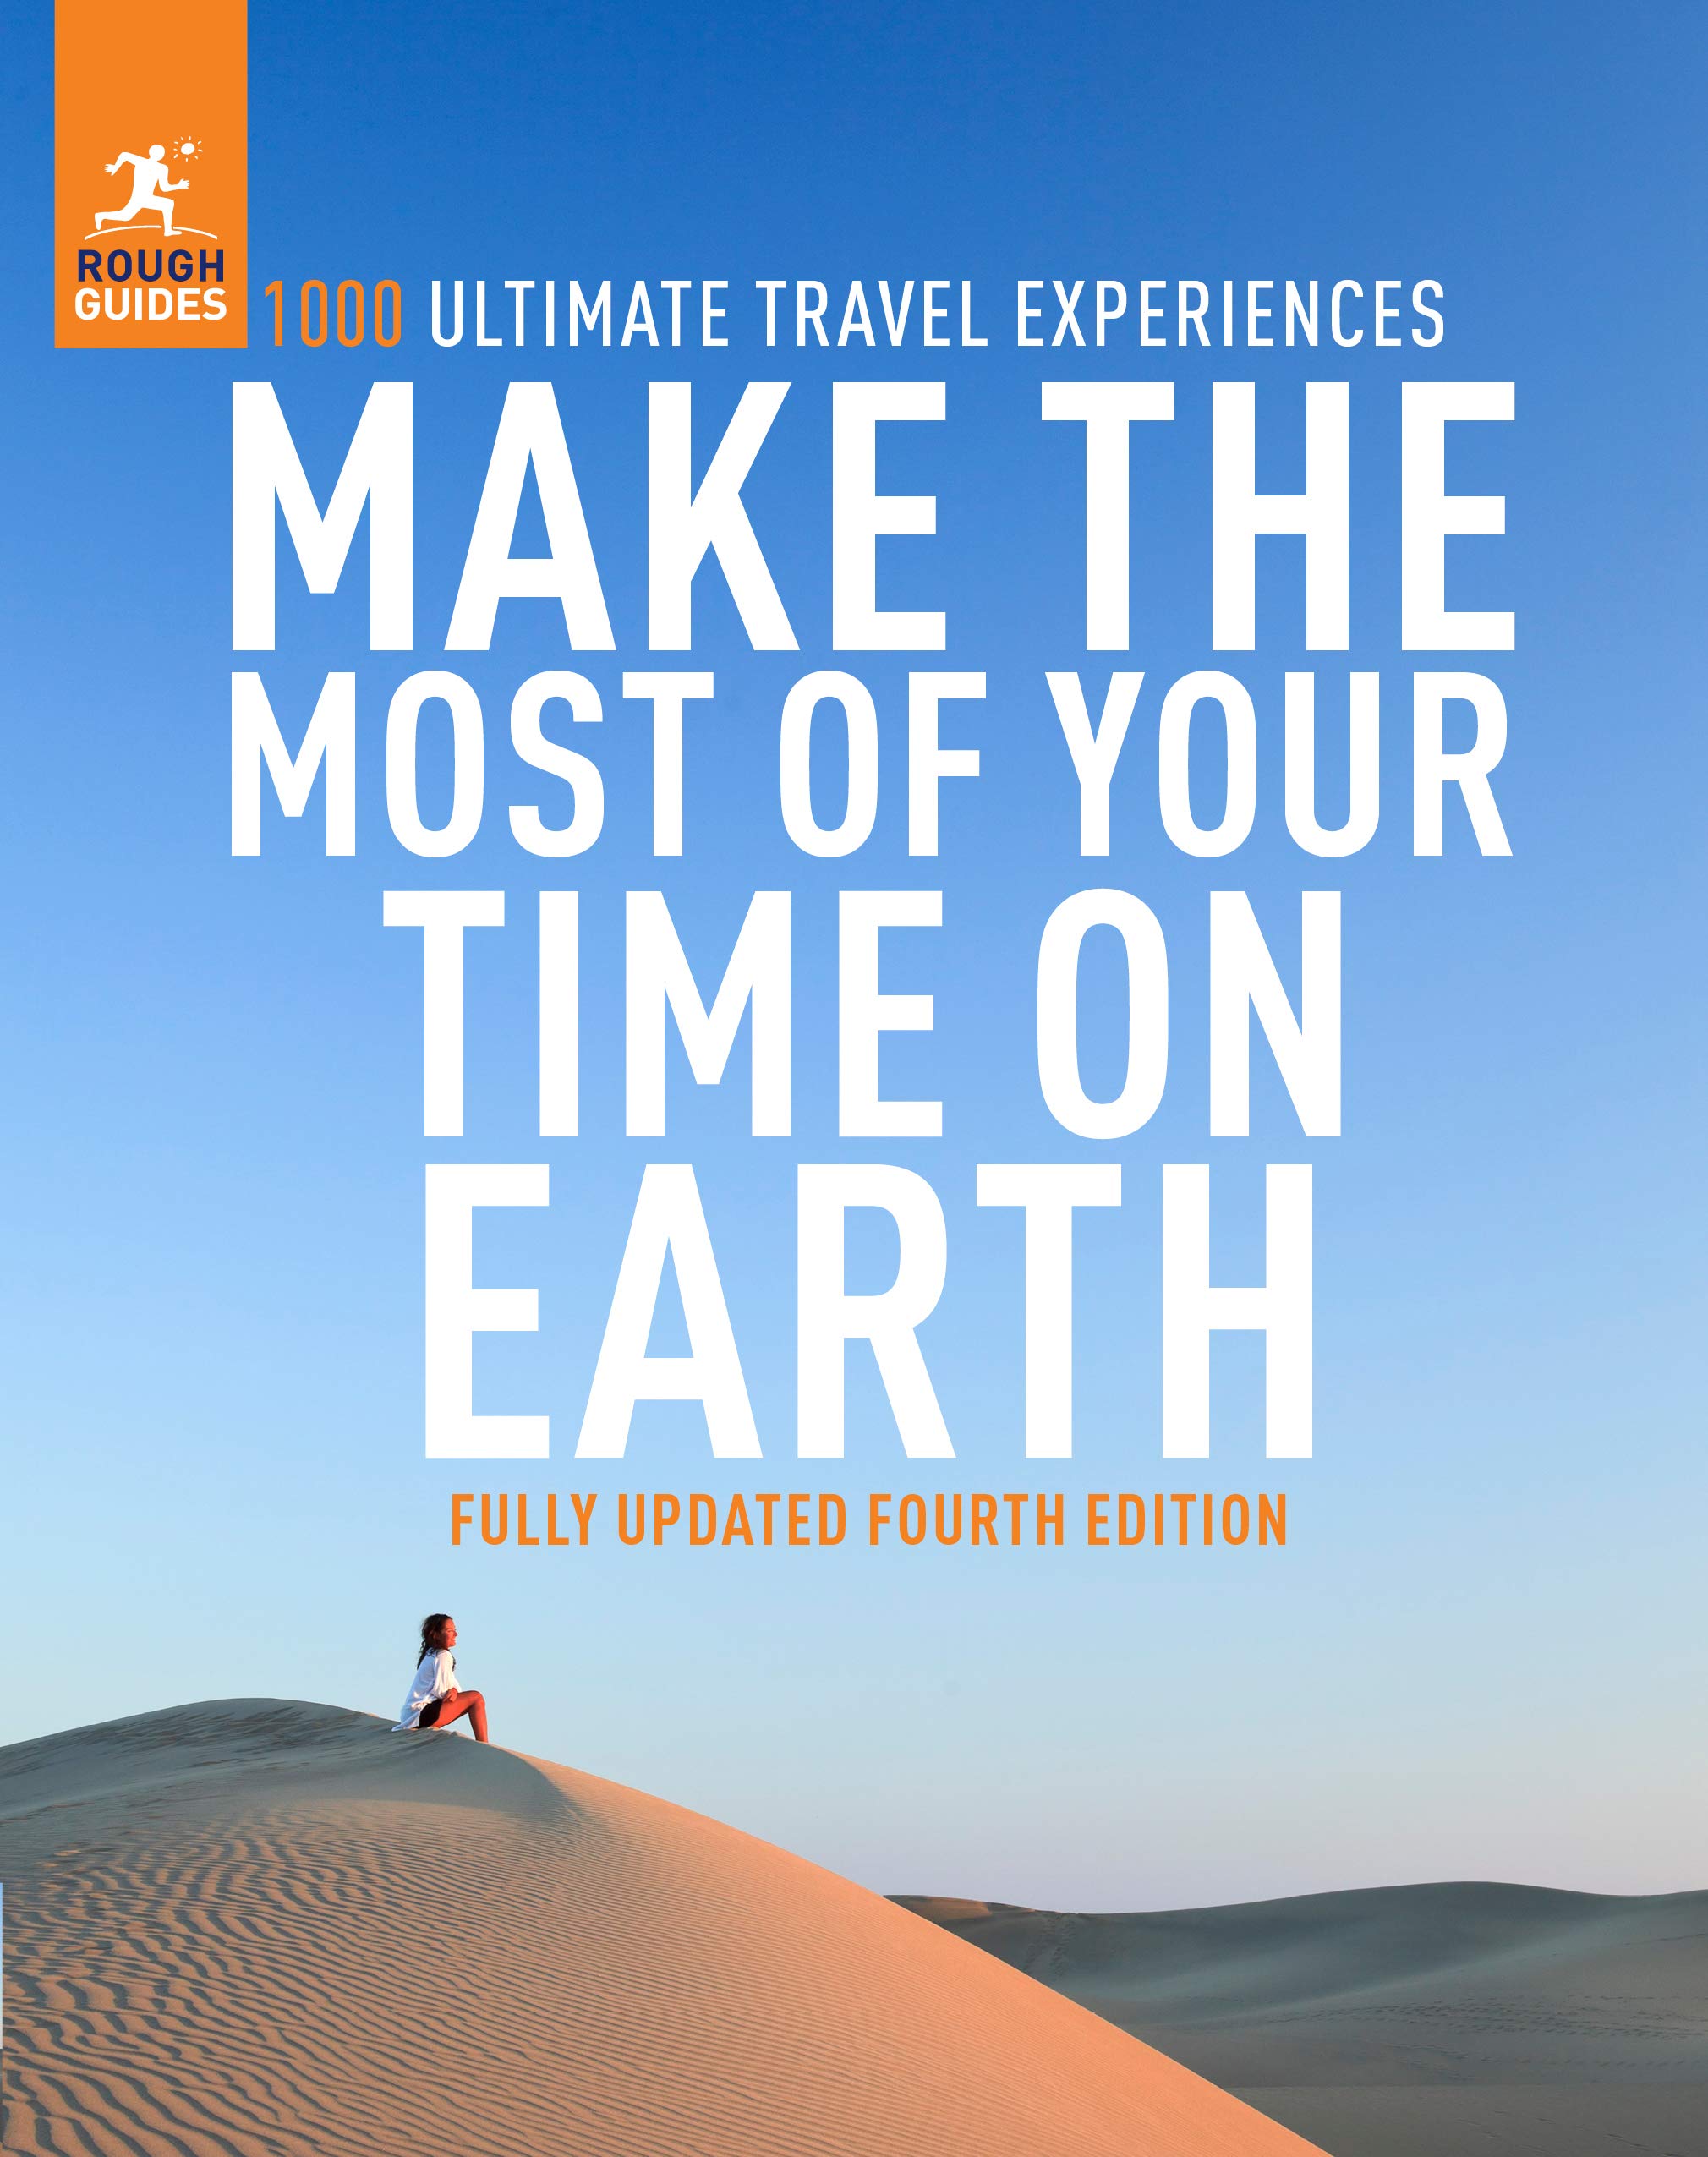 Rough Guides: Make the Most of Your Time on Earth